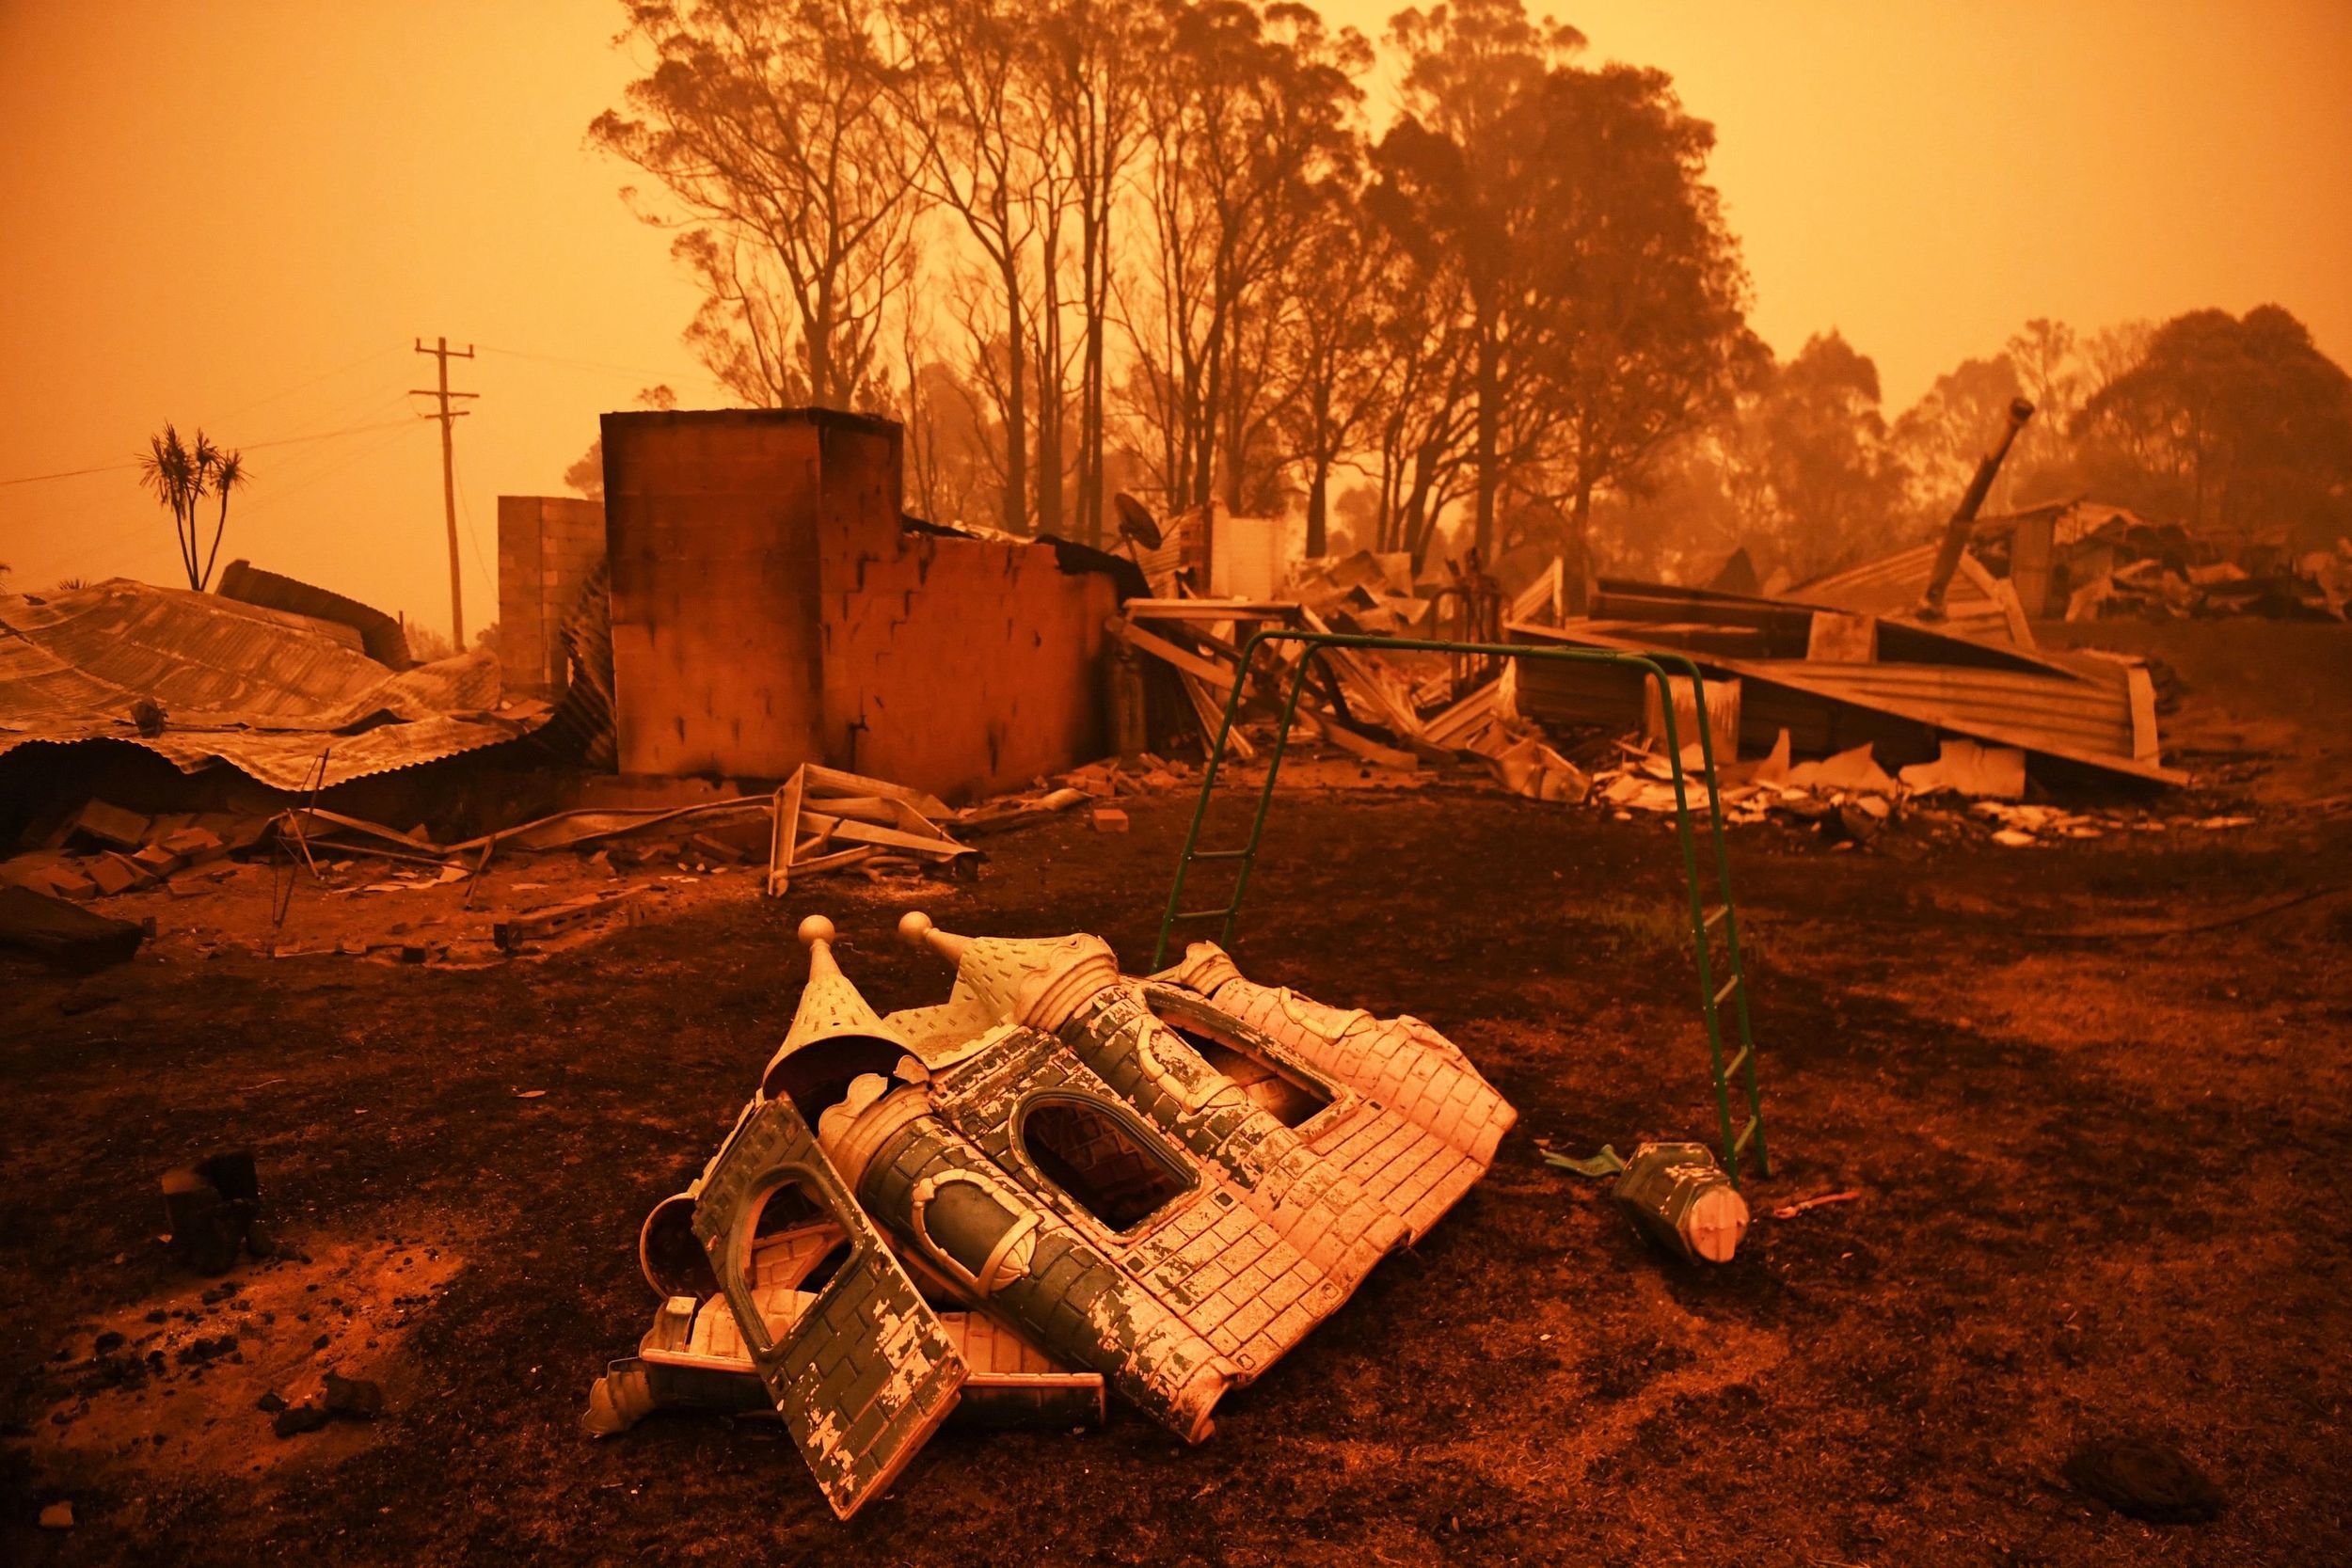 Hard Numbers: There's a single blaze in Australia the size of Manhattan